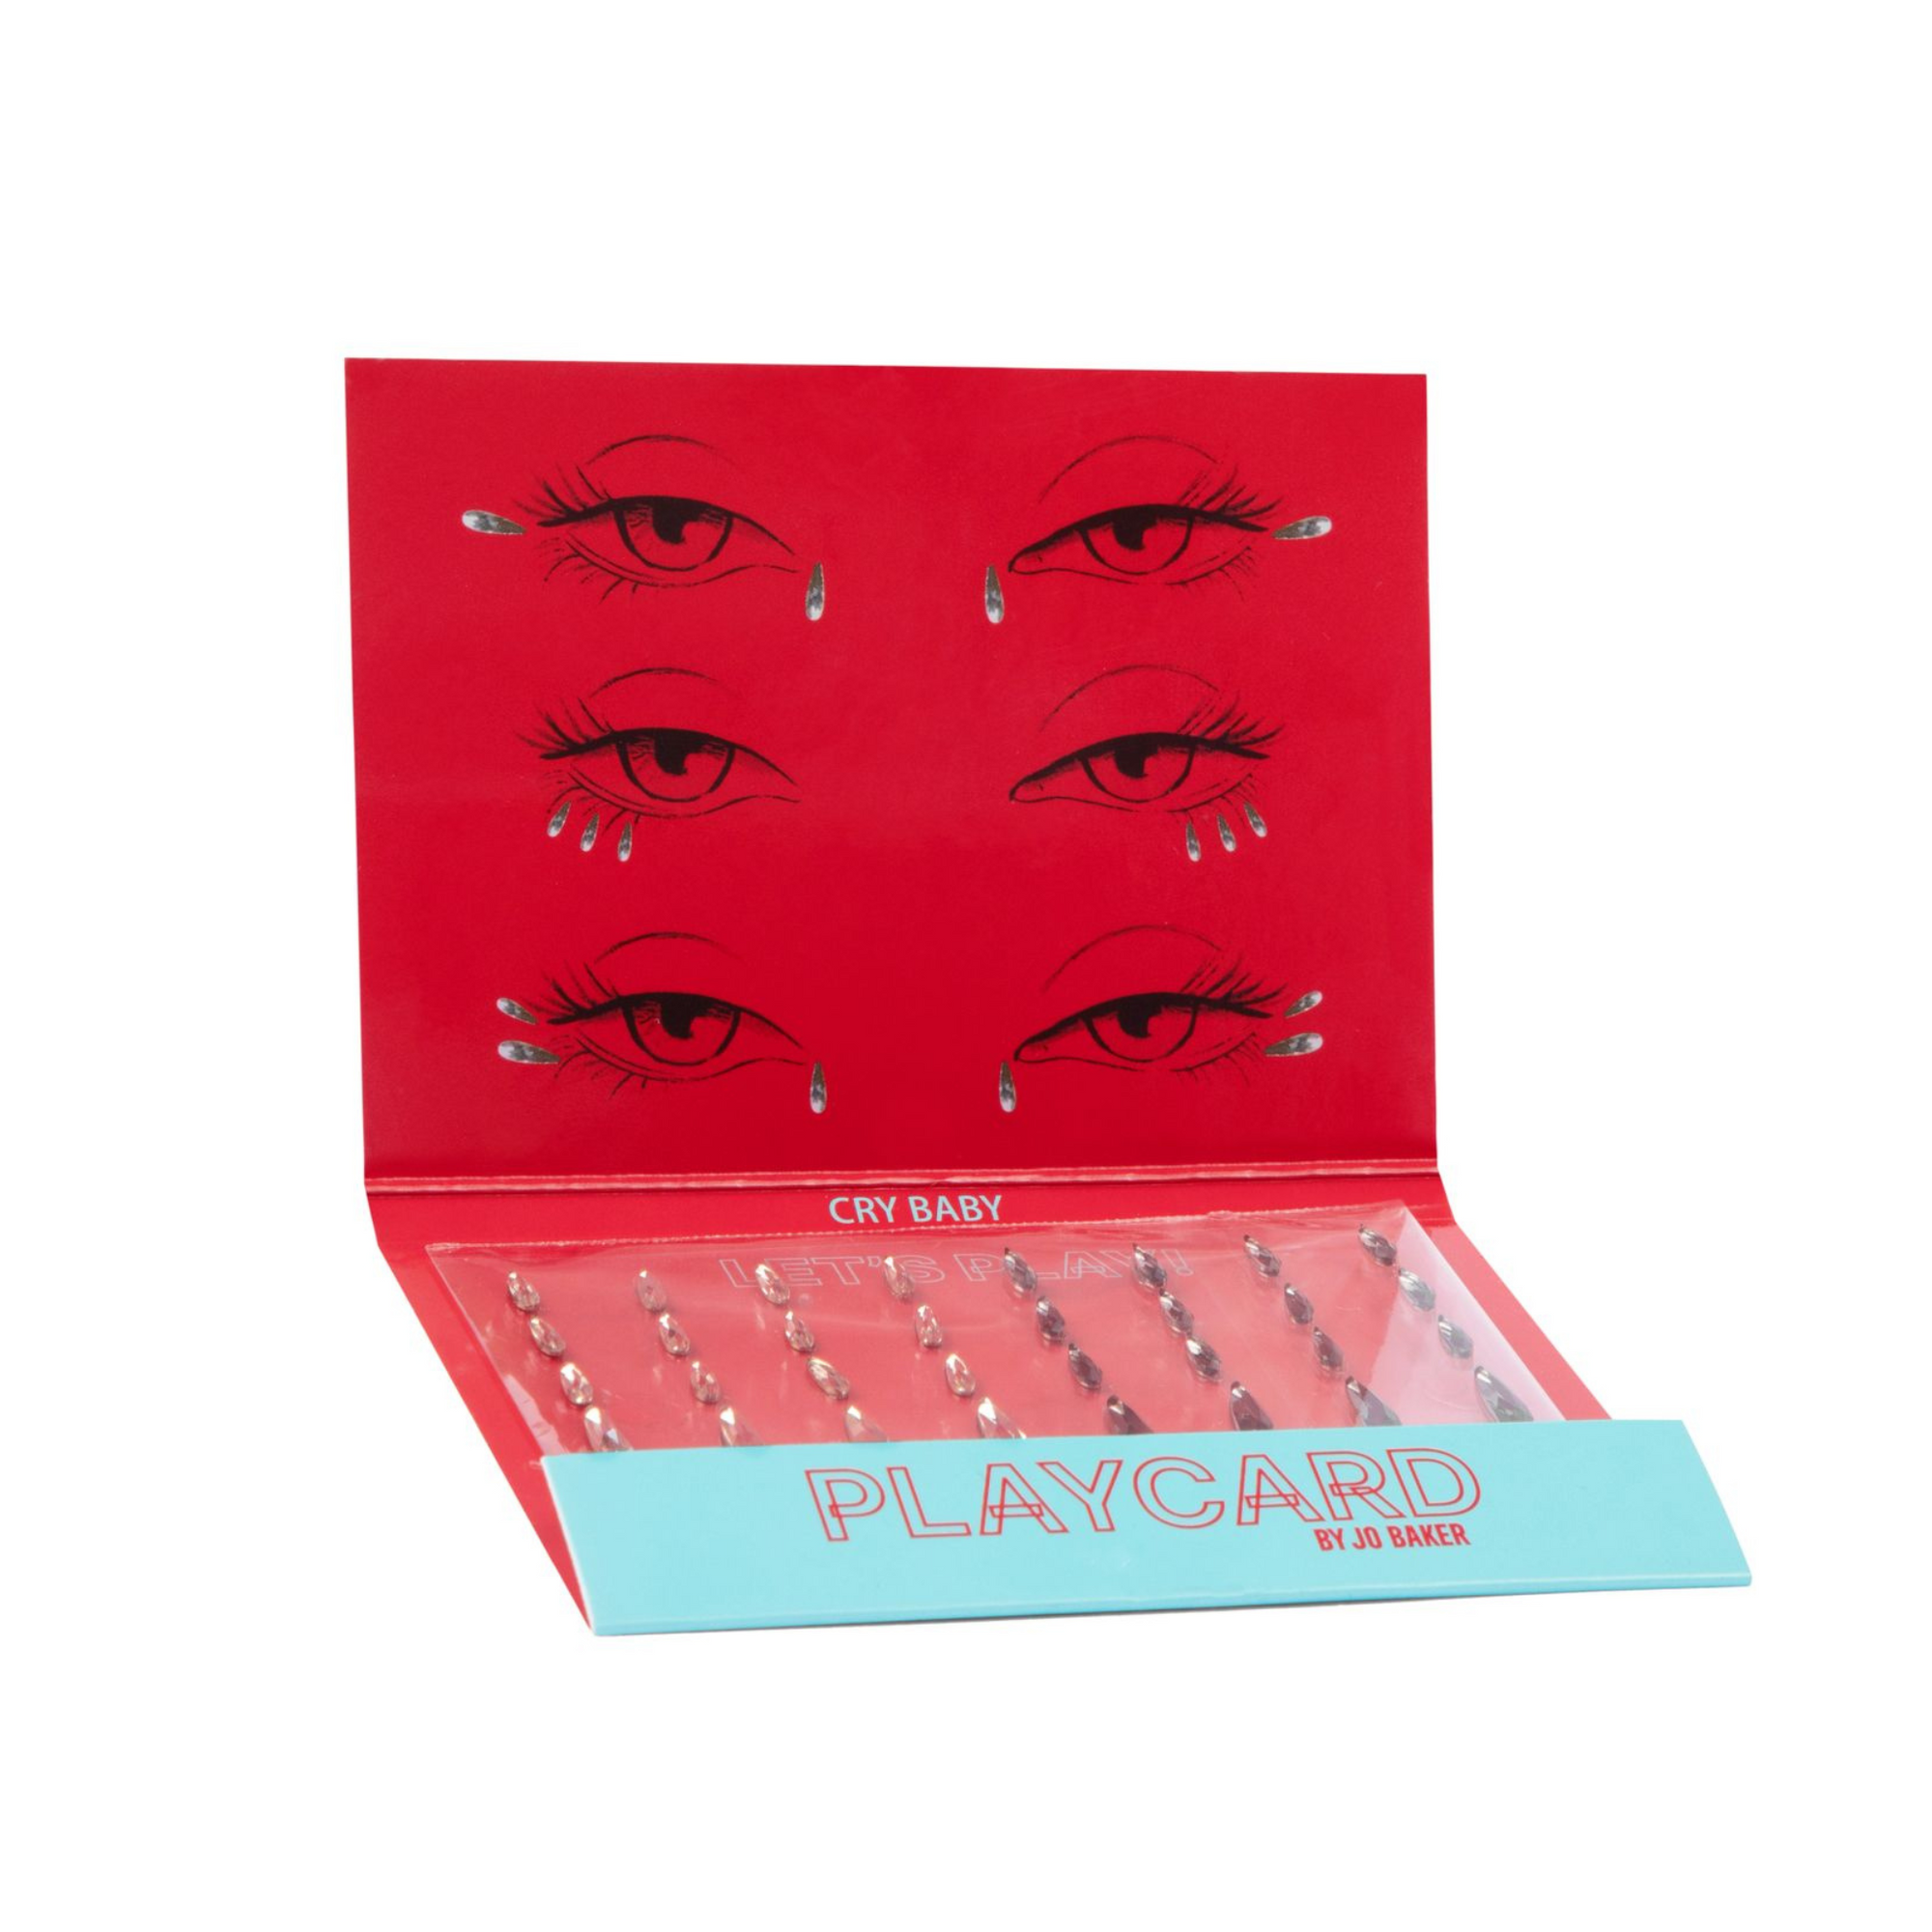 Cry Baby Playcard by Jo Baker